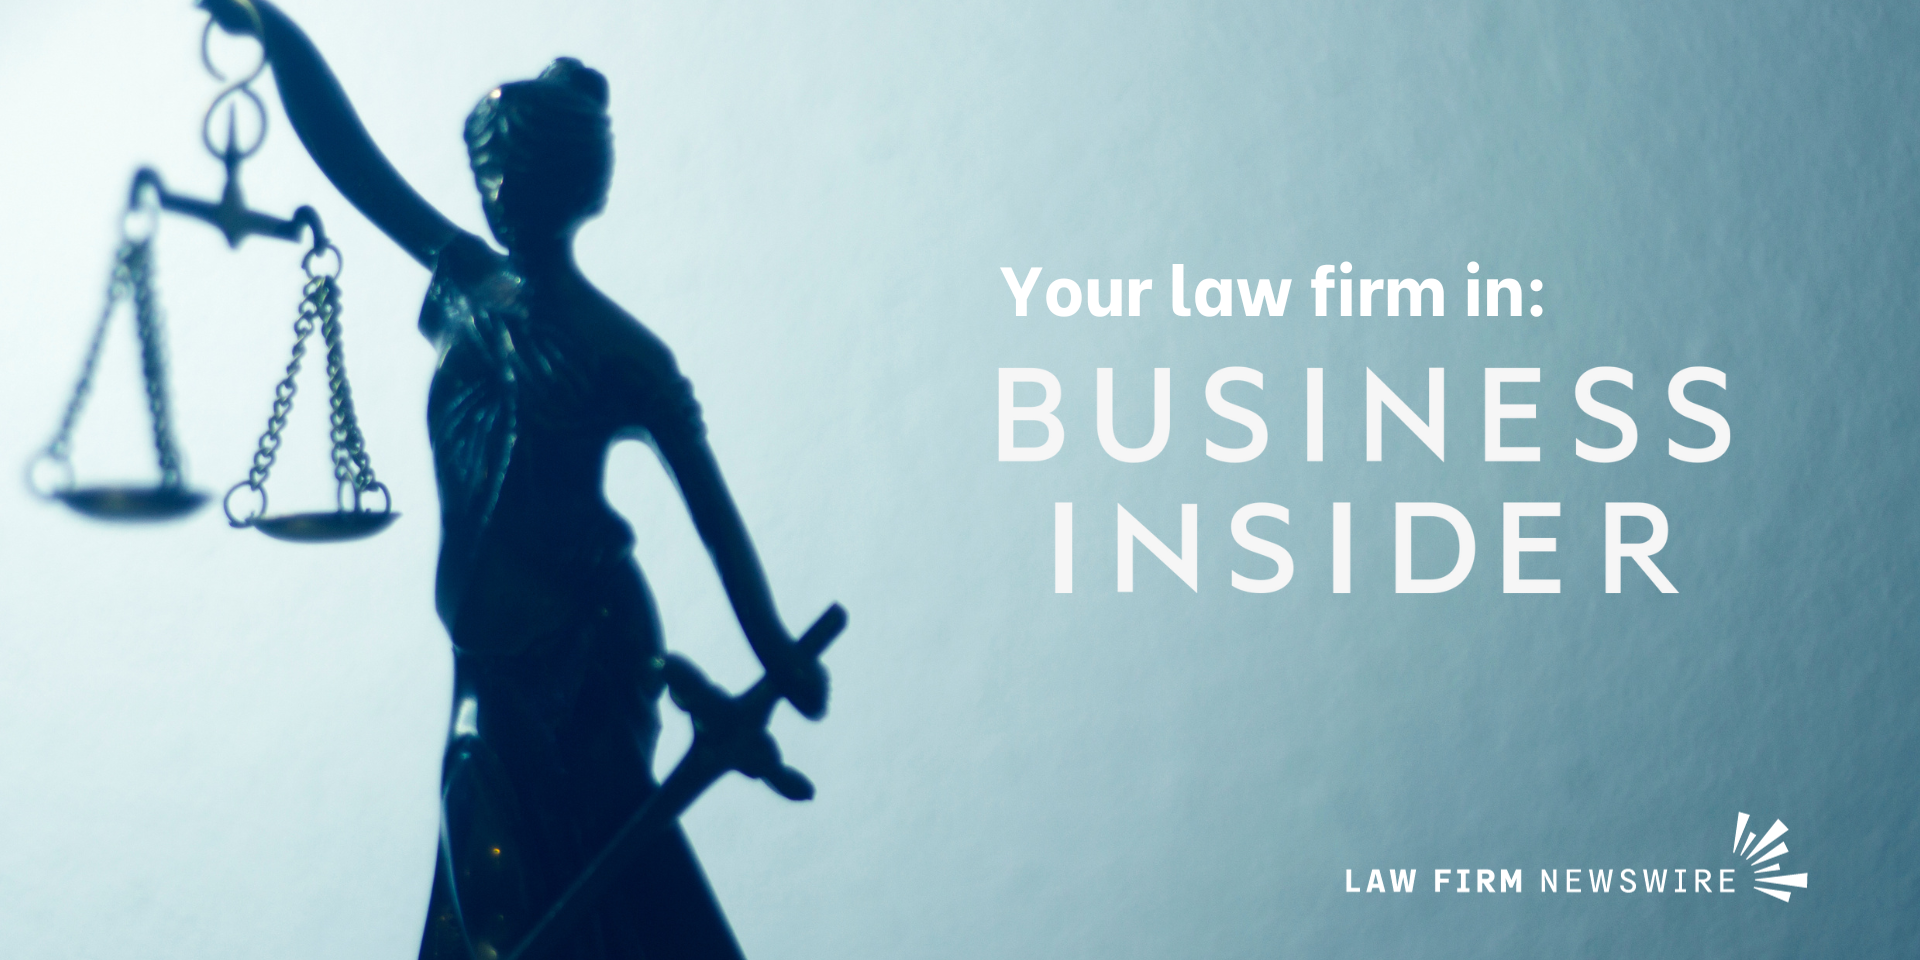 Business Insider on Law Firm Newswire